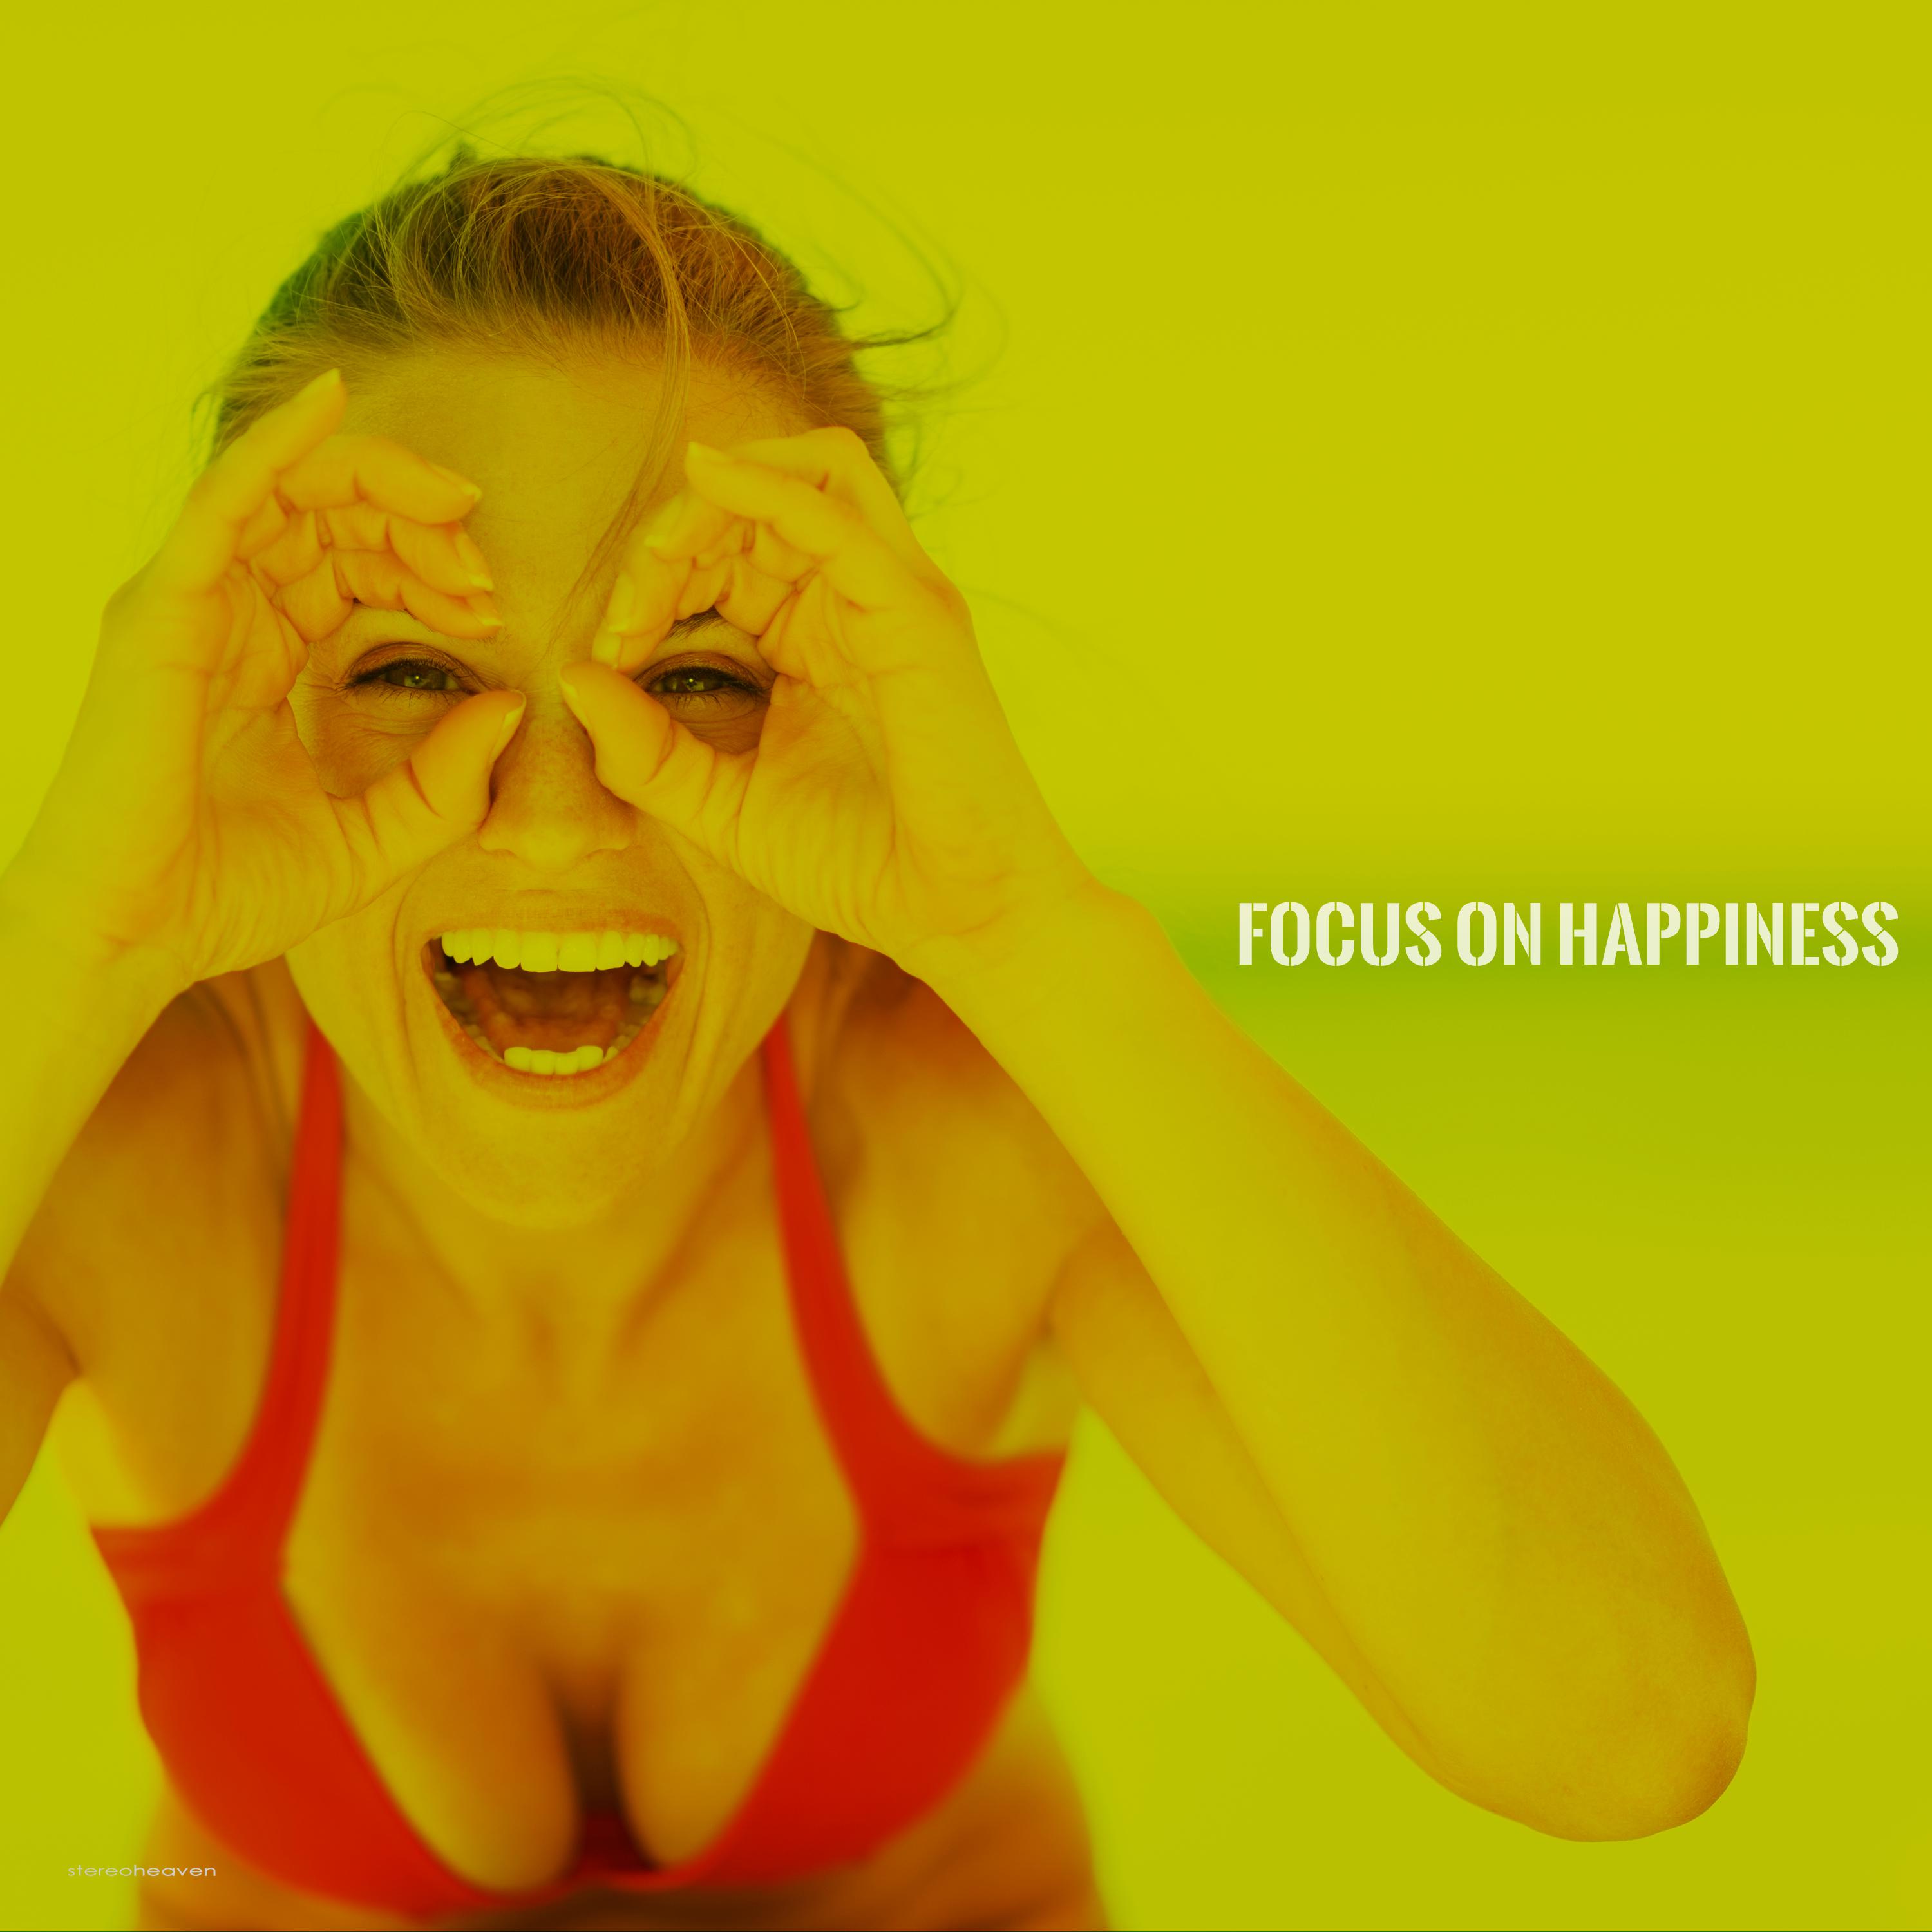 Focus on Happiness